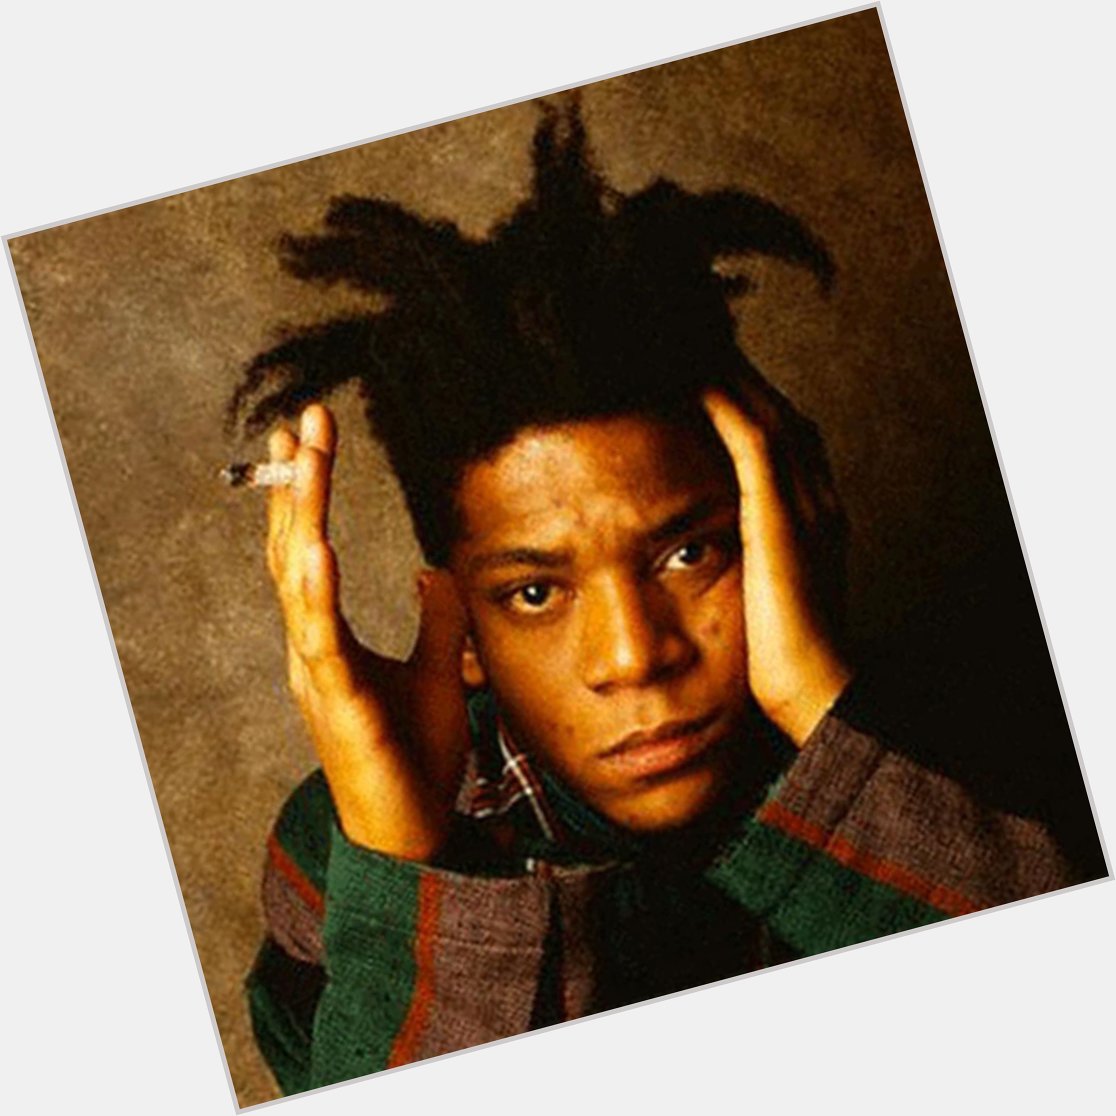 Happy Birthday to Jean-Michel Basquiat, who would have been 60 years old today. 